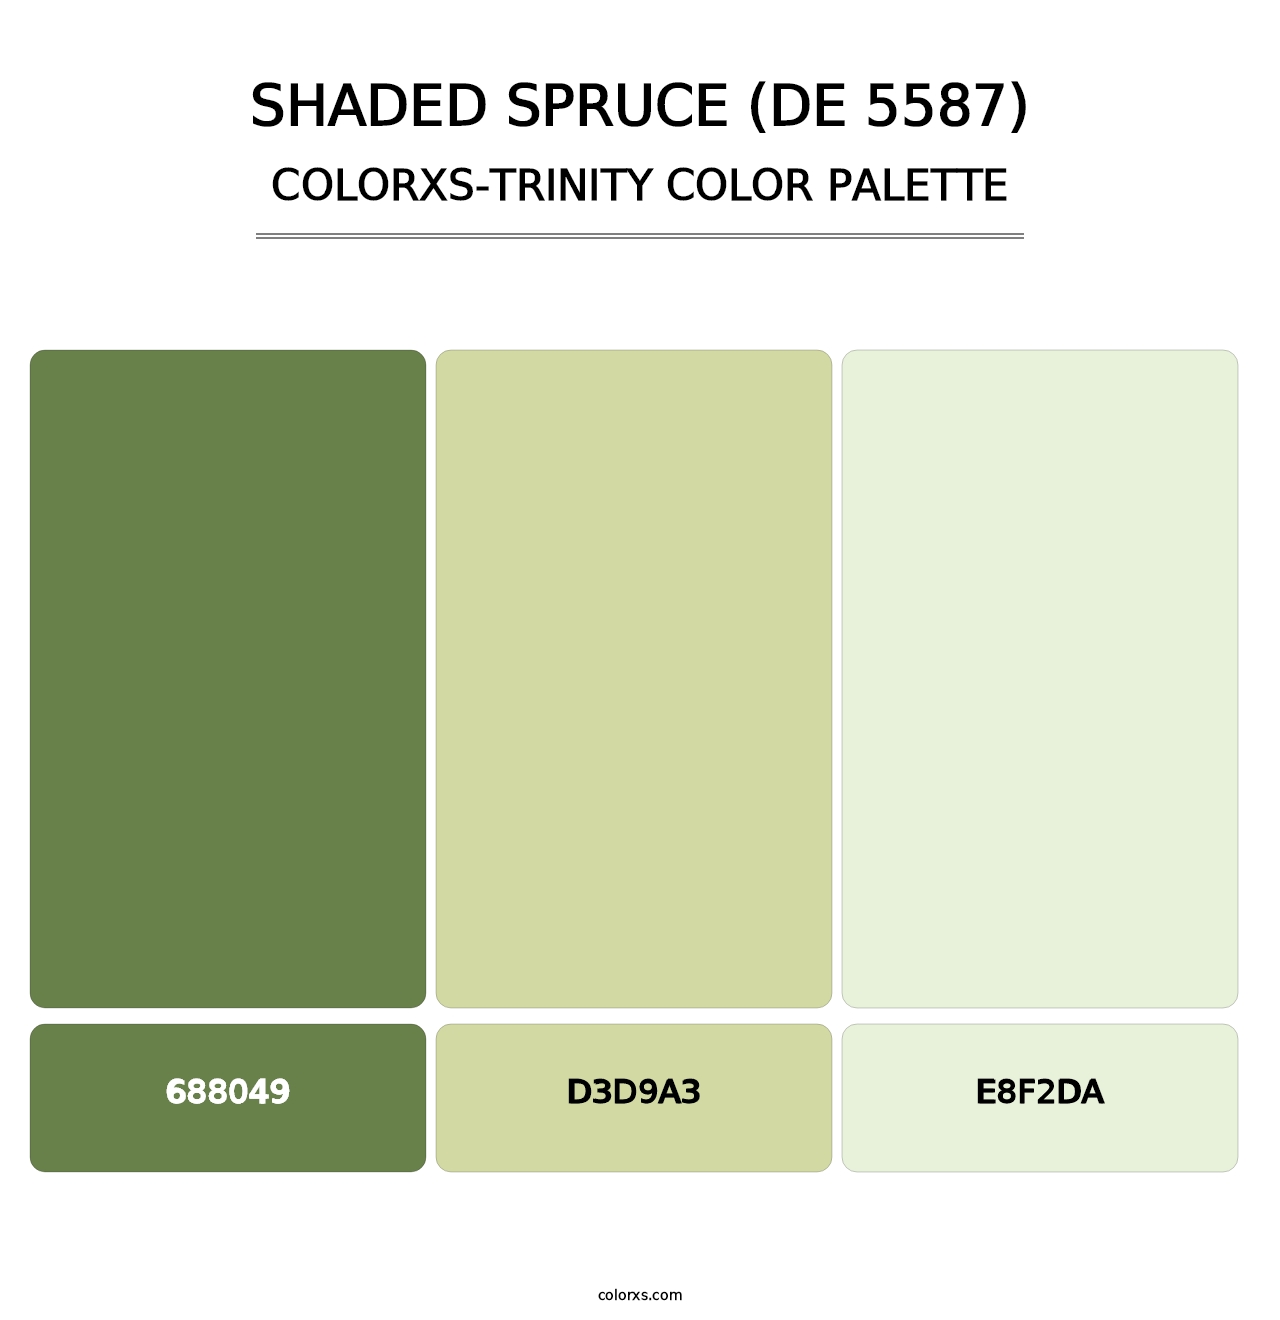 Shaded Spruce (DE 5587) - Colorxs Trinity Palette